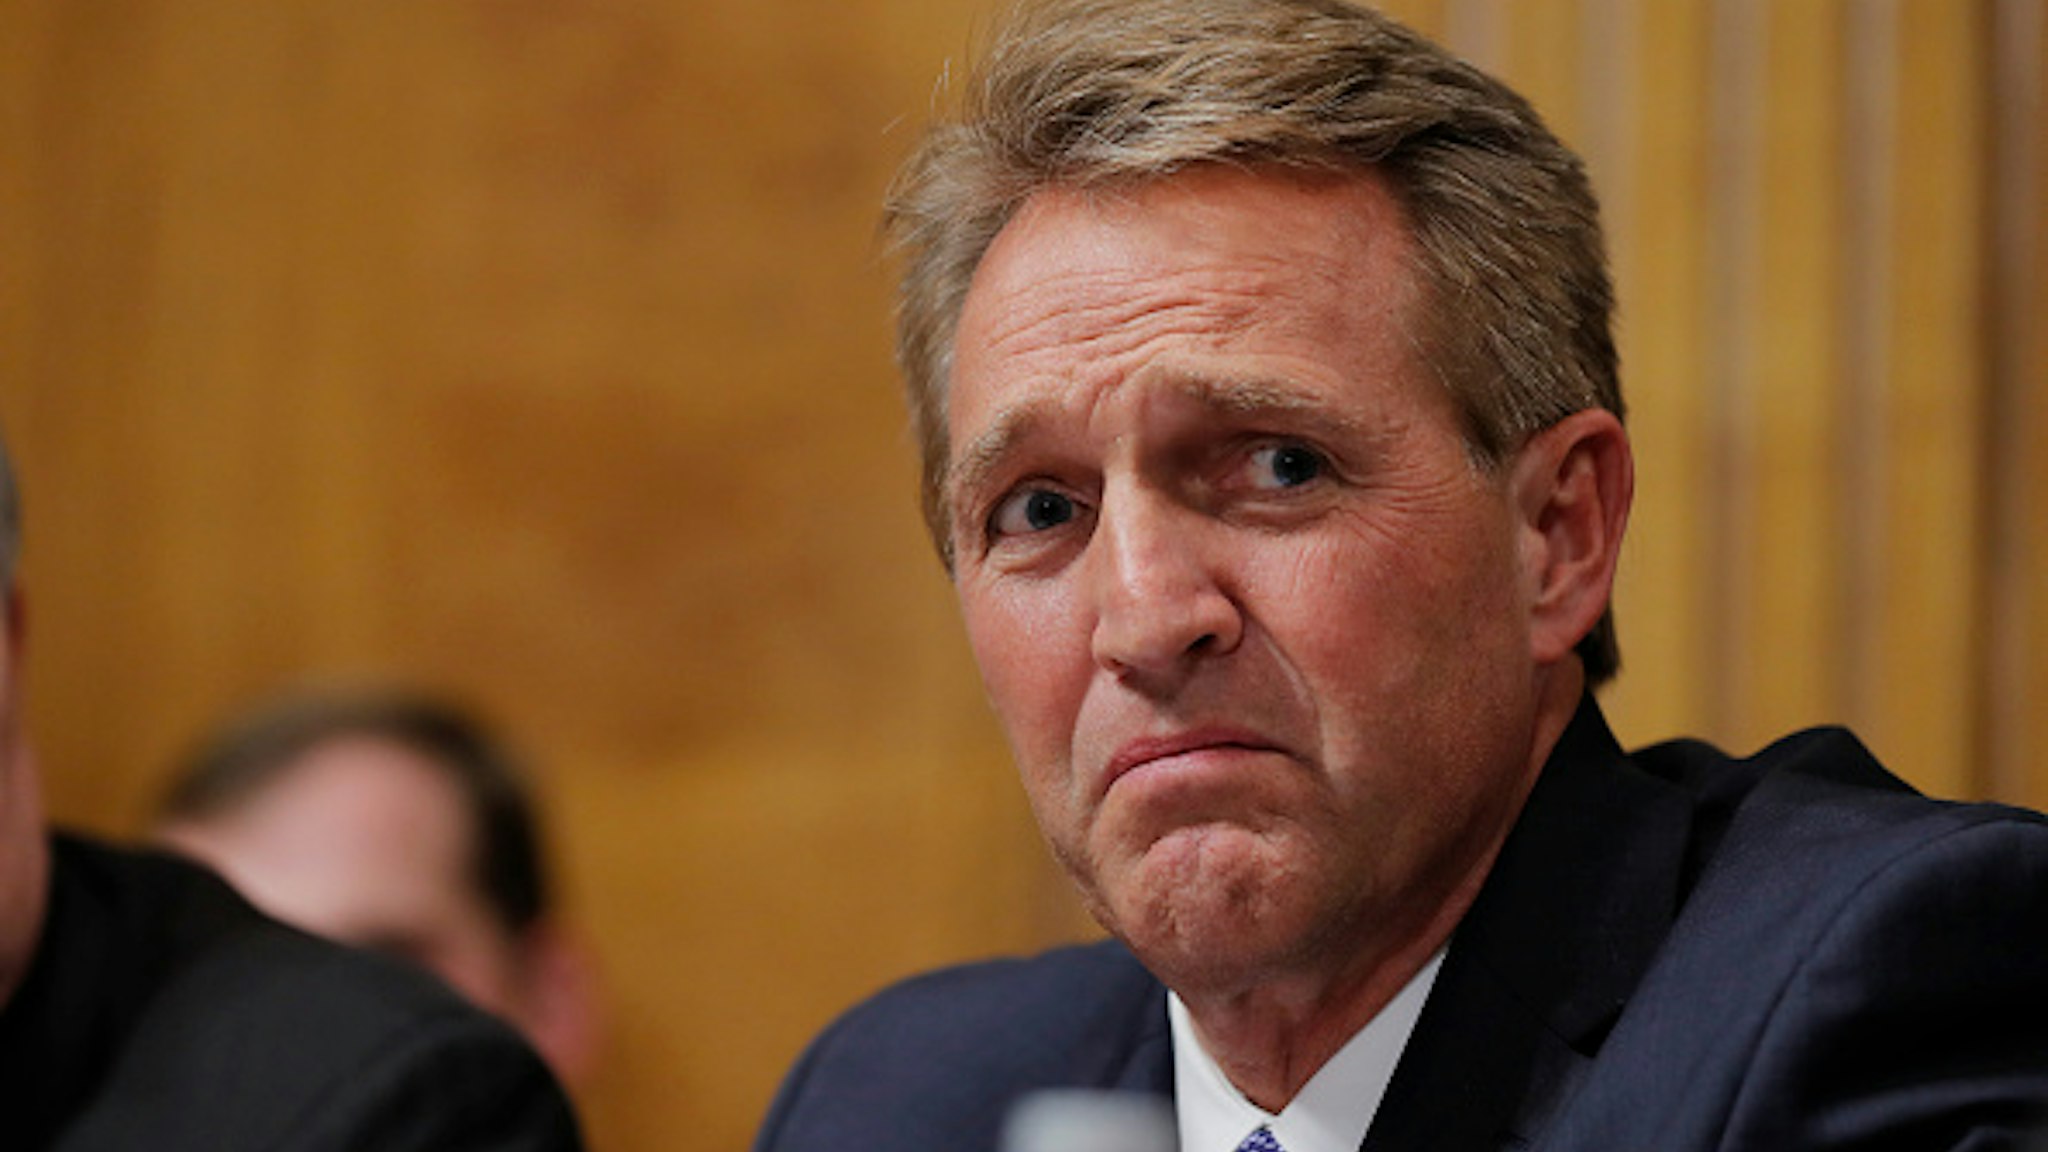 WASHINGTON D.C. - SEPTEMBER 27: U.S. Senator Jeff Flake (R-AZ) looks on during Judge Brett Kavanaugh's testimony to the Senate Judiciary Committee during his Supreme Court confirmation hearing in the Dirksen Senate Office Building on Capitol Hill September 27, 2018 in Washington, DC. Kavanaugh was called back to testify about claims by Christine Blasey Ford, who has accused him of sexually assaulting her during a party in 1982 when they were high school students in suburban Maryland